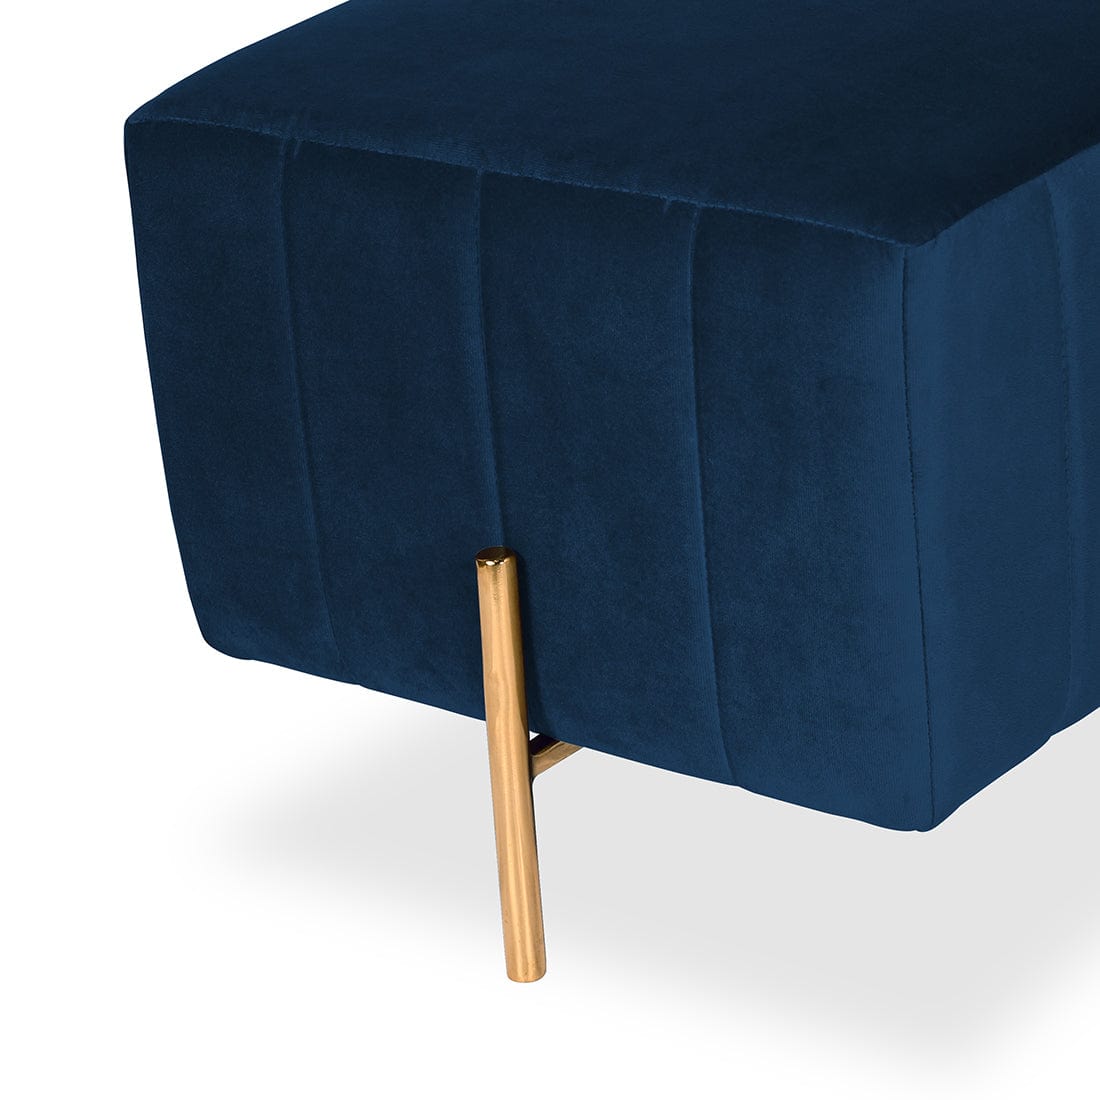 DOE BUCK SQUARE GOLD OTTOMAN STAINLESS STEEL IN BLUE